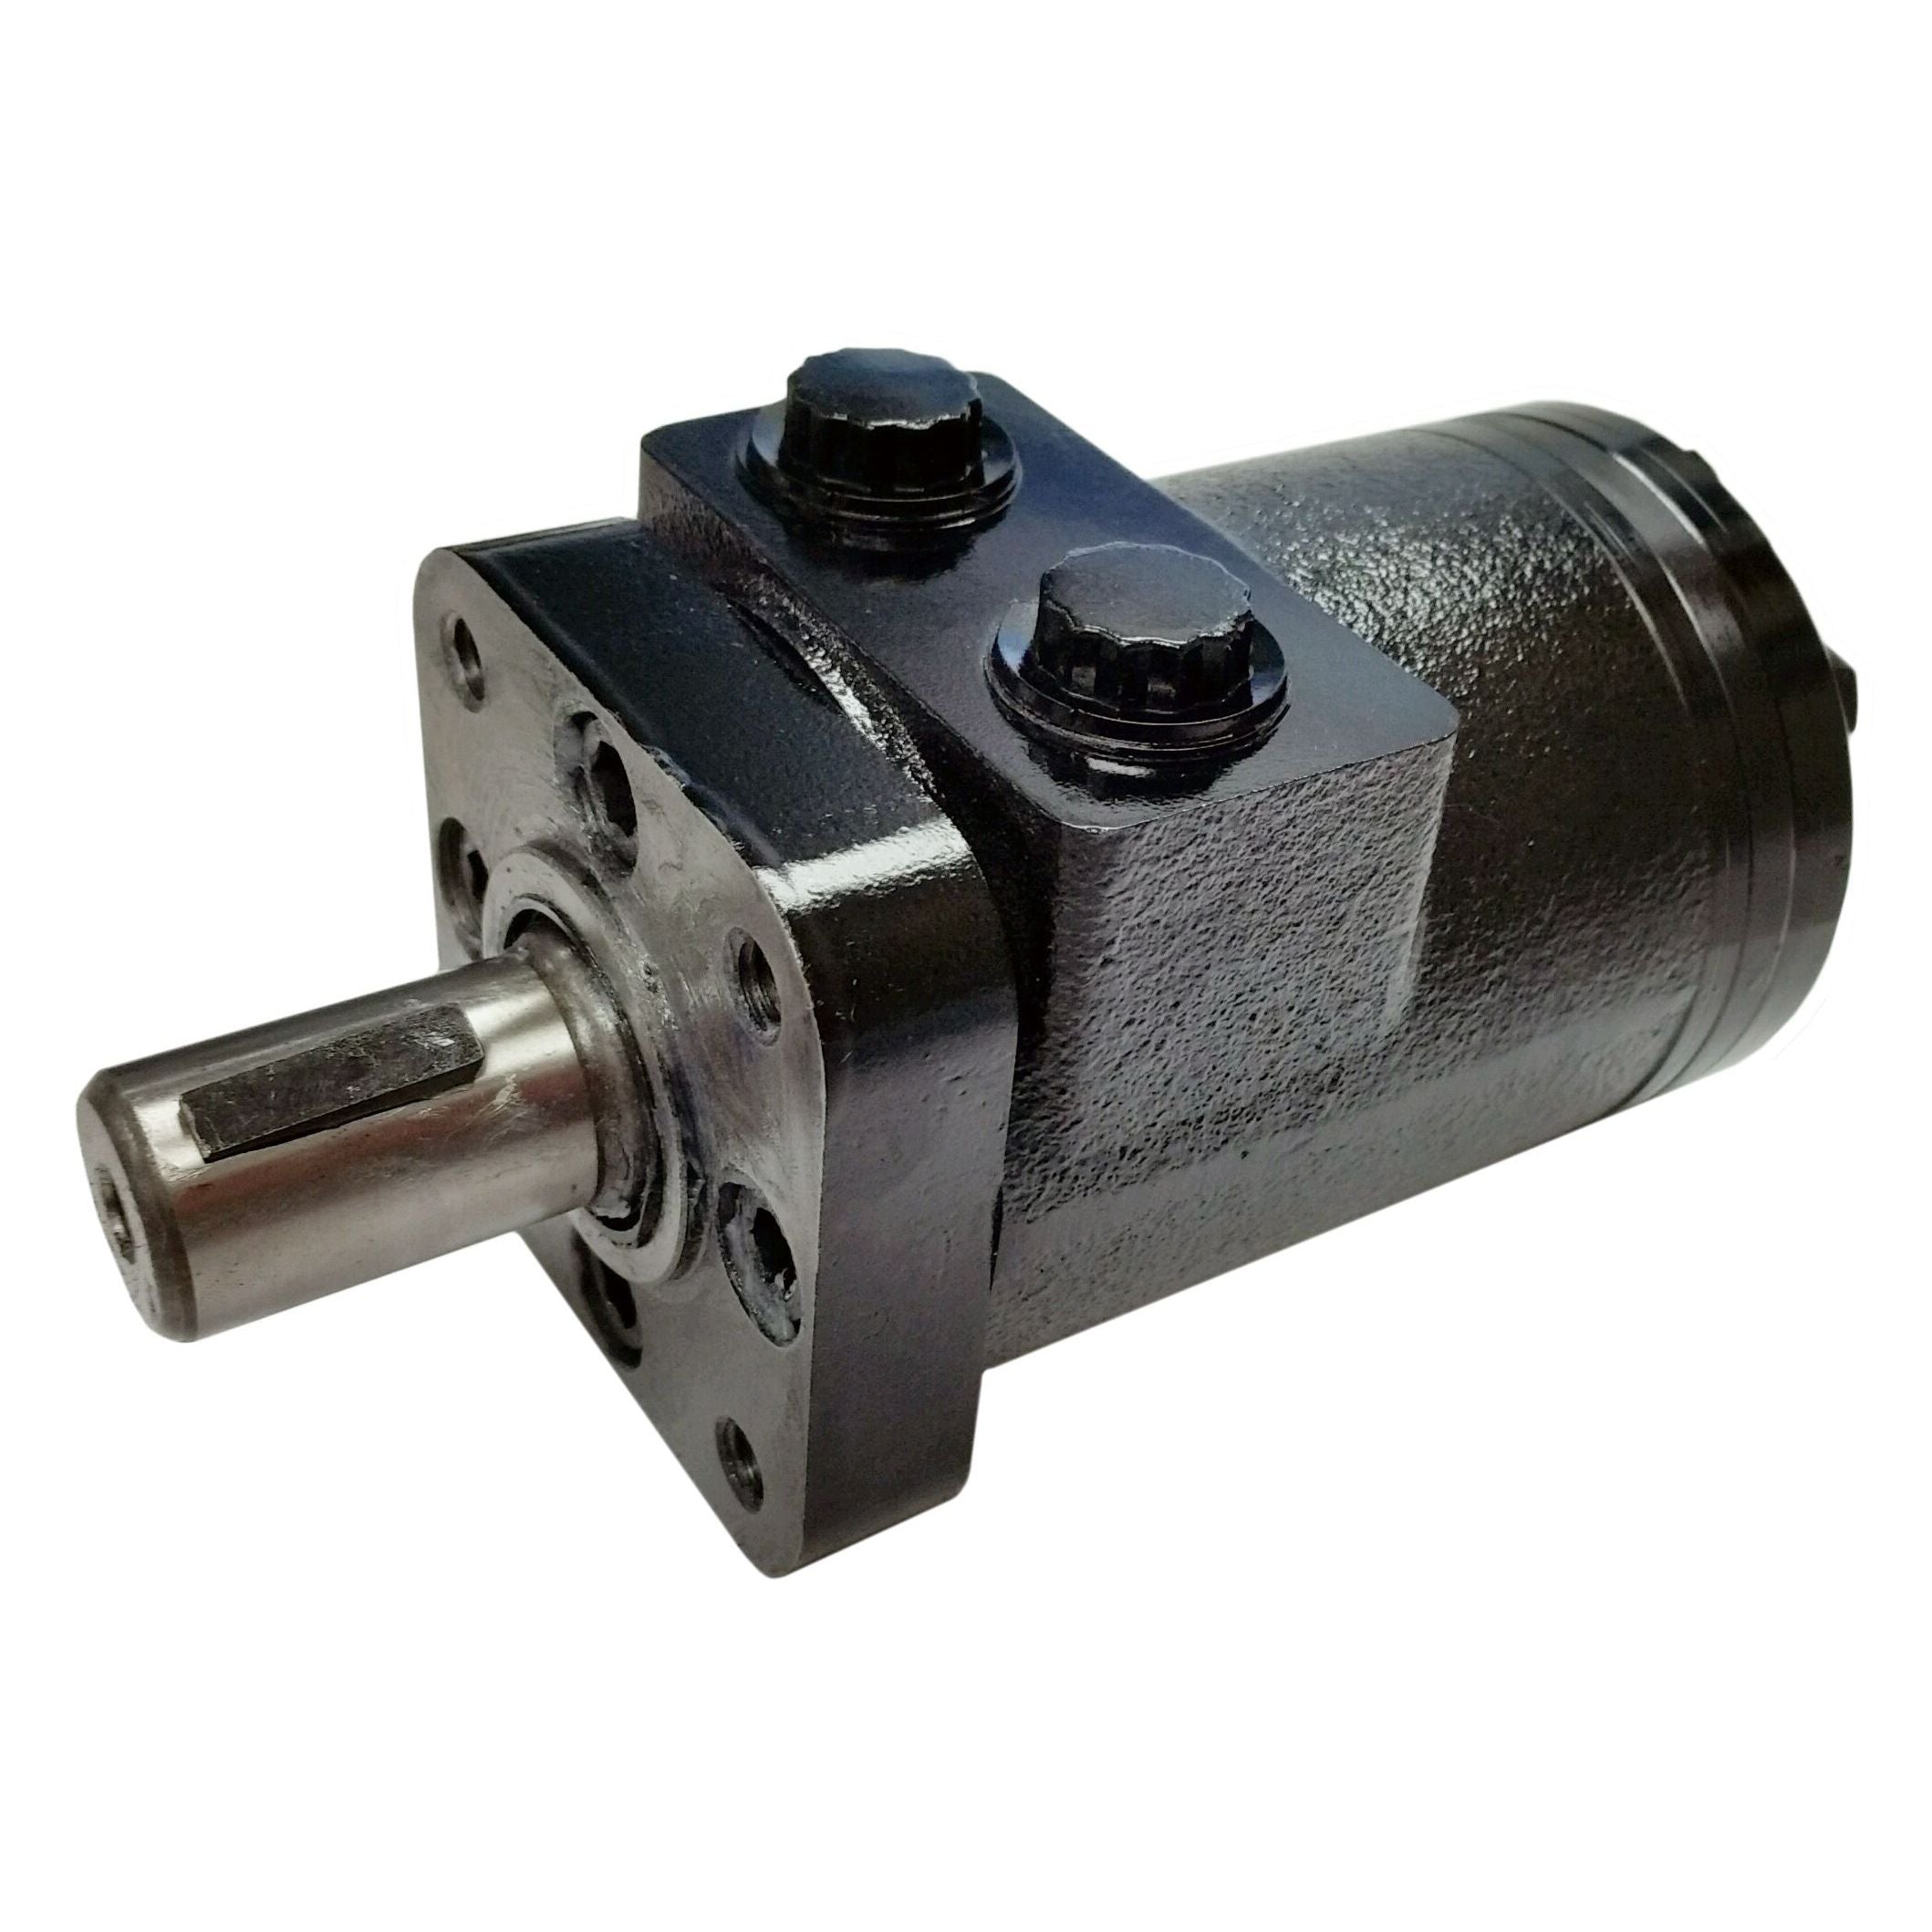 BMPH-315-H4-K-S : Dynamic LSHT Motor, 315cc, 192RPM, 3319in-lb, 1813psi Differential, 15.85GPM, SAE A 4-Bolt Mount, 1" Bore x 1/4" Key Shaft, Side Ported, #10 SAE (5/8")